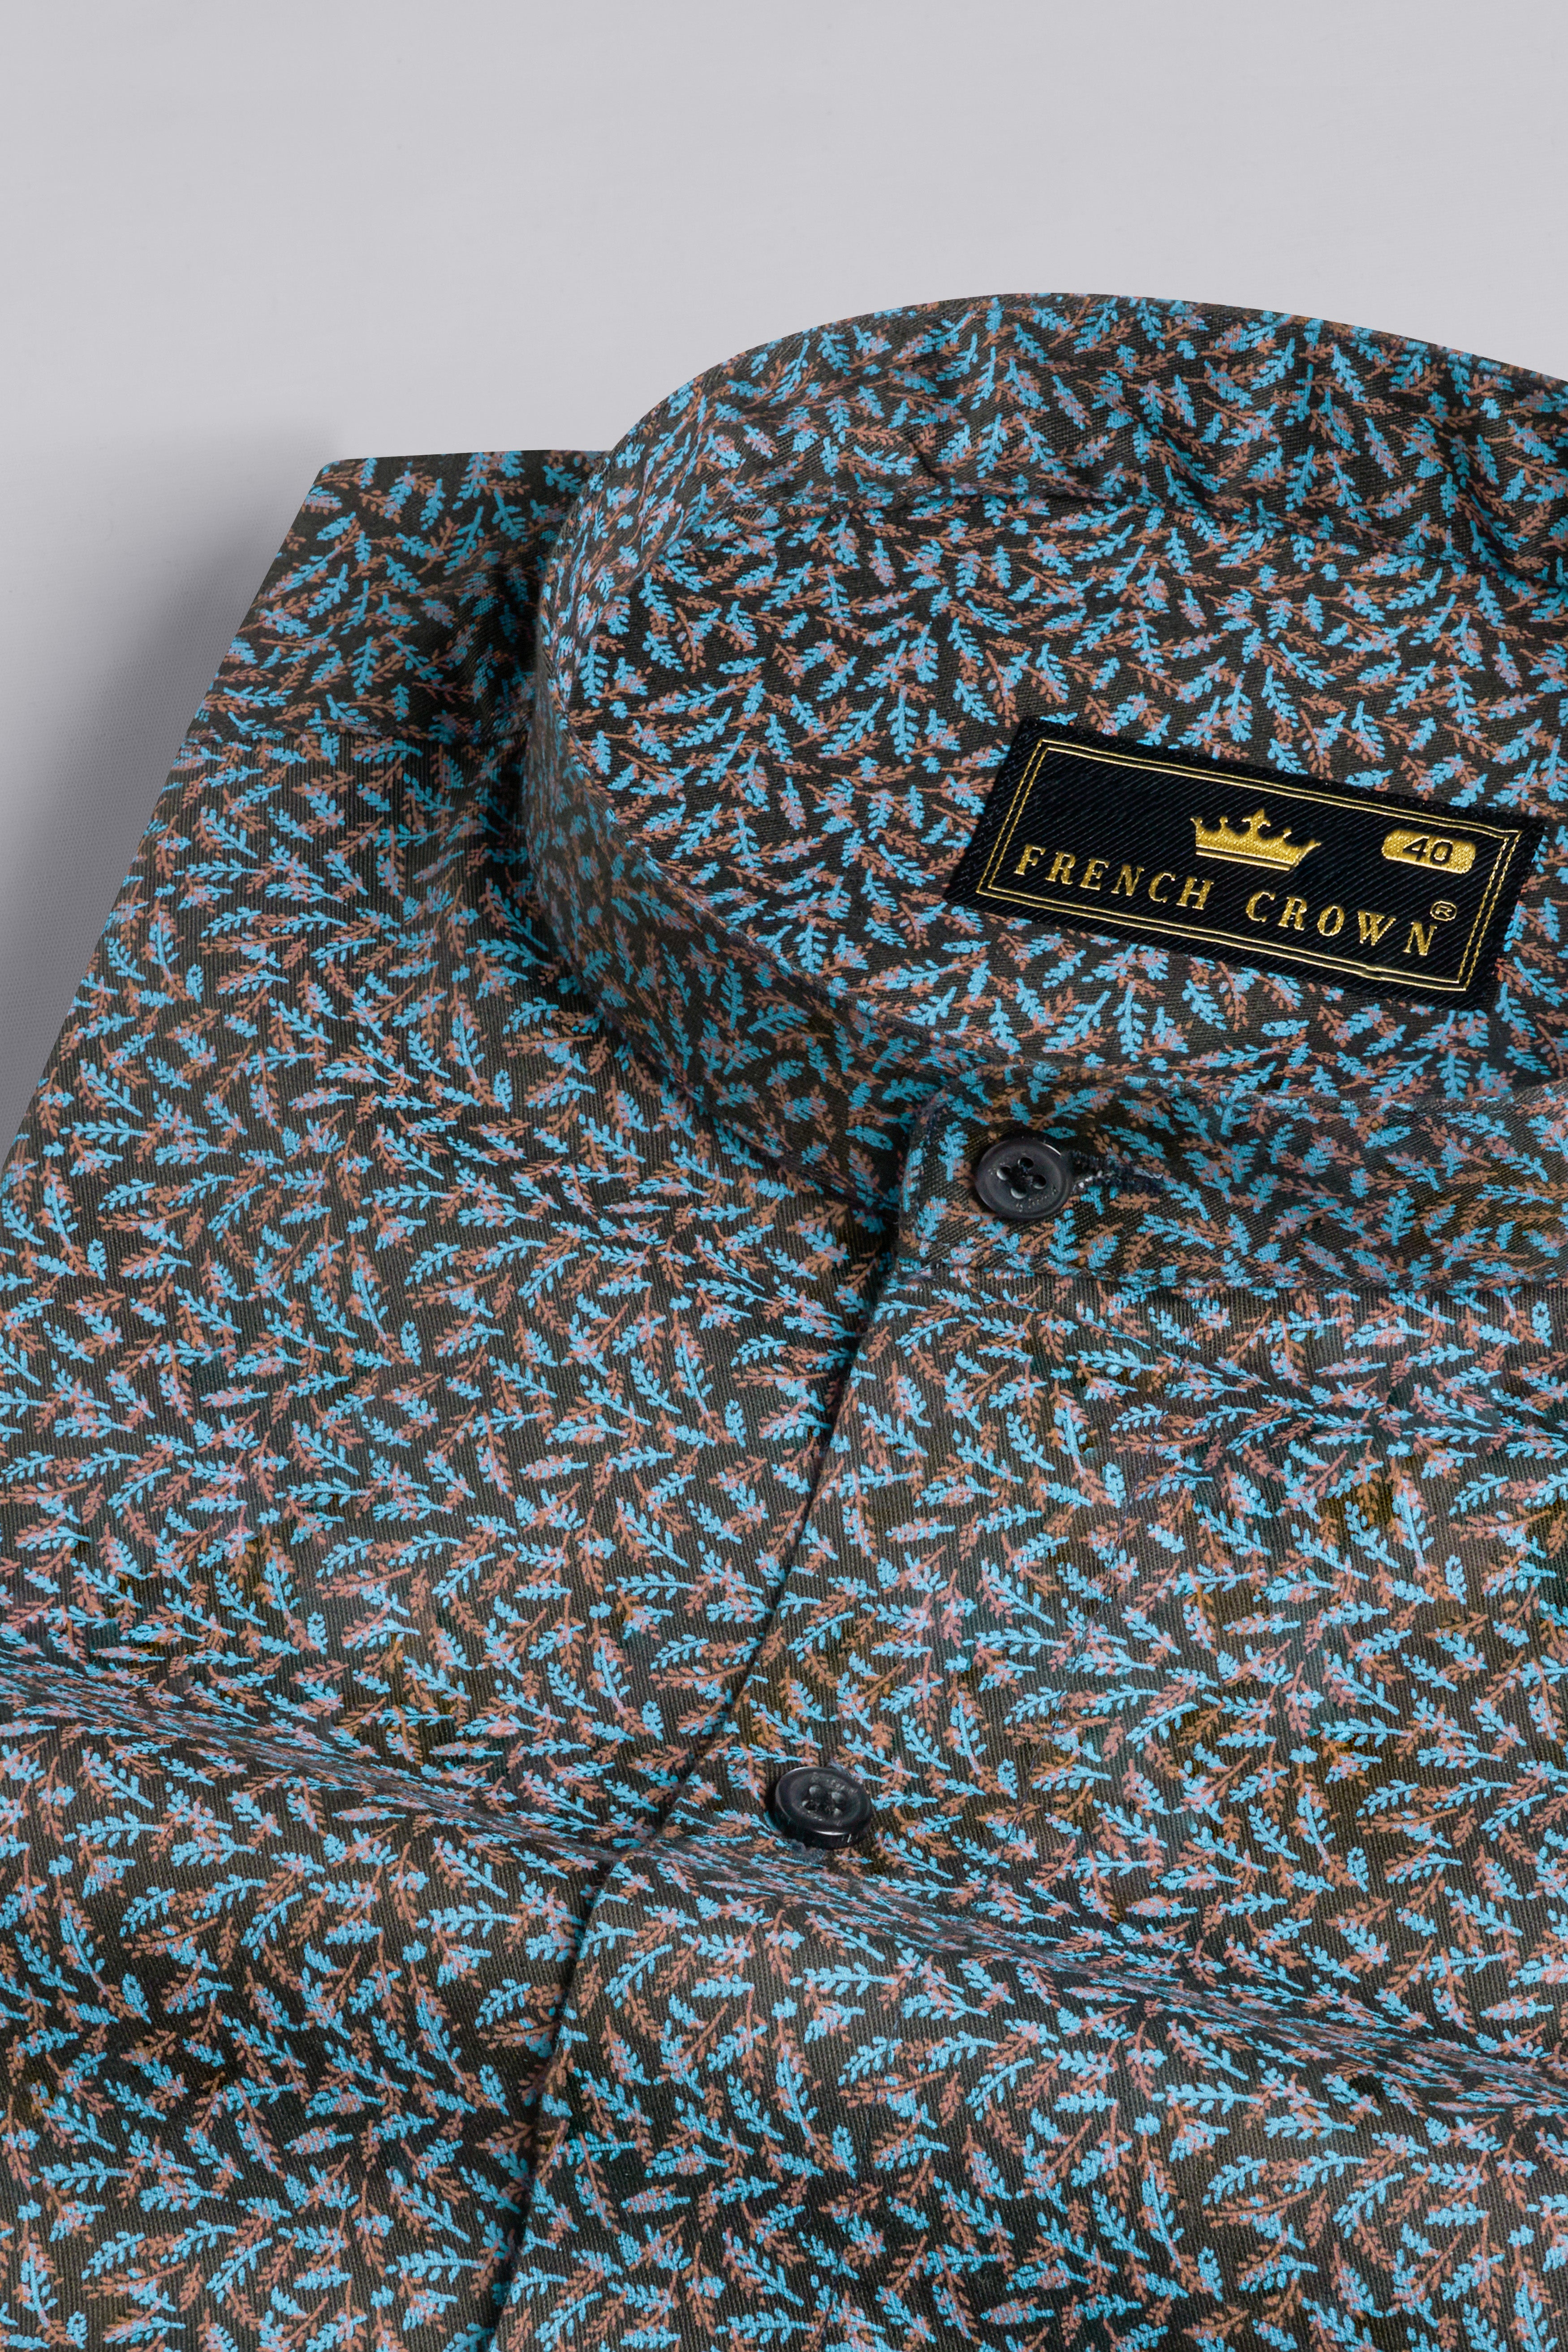 Zeus Black with Copper Rose Brown and Waikawa Blue Funky Printed Royal Oxford Designer Shirt